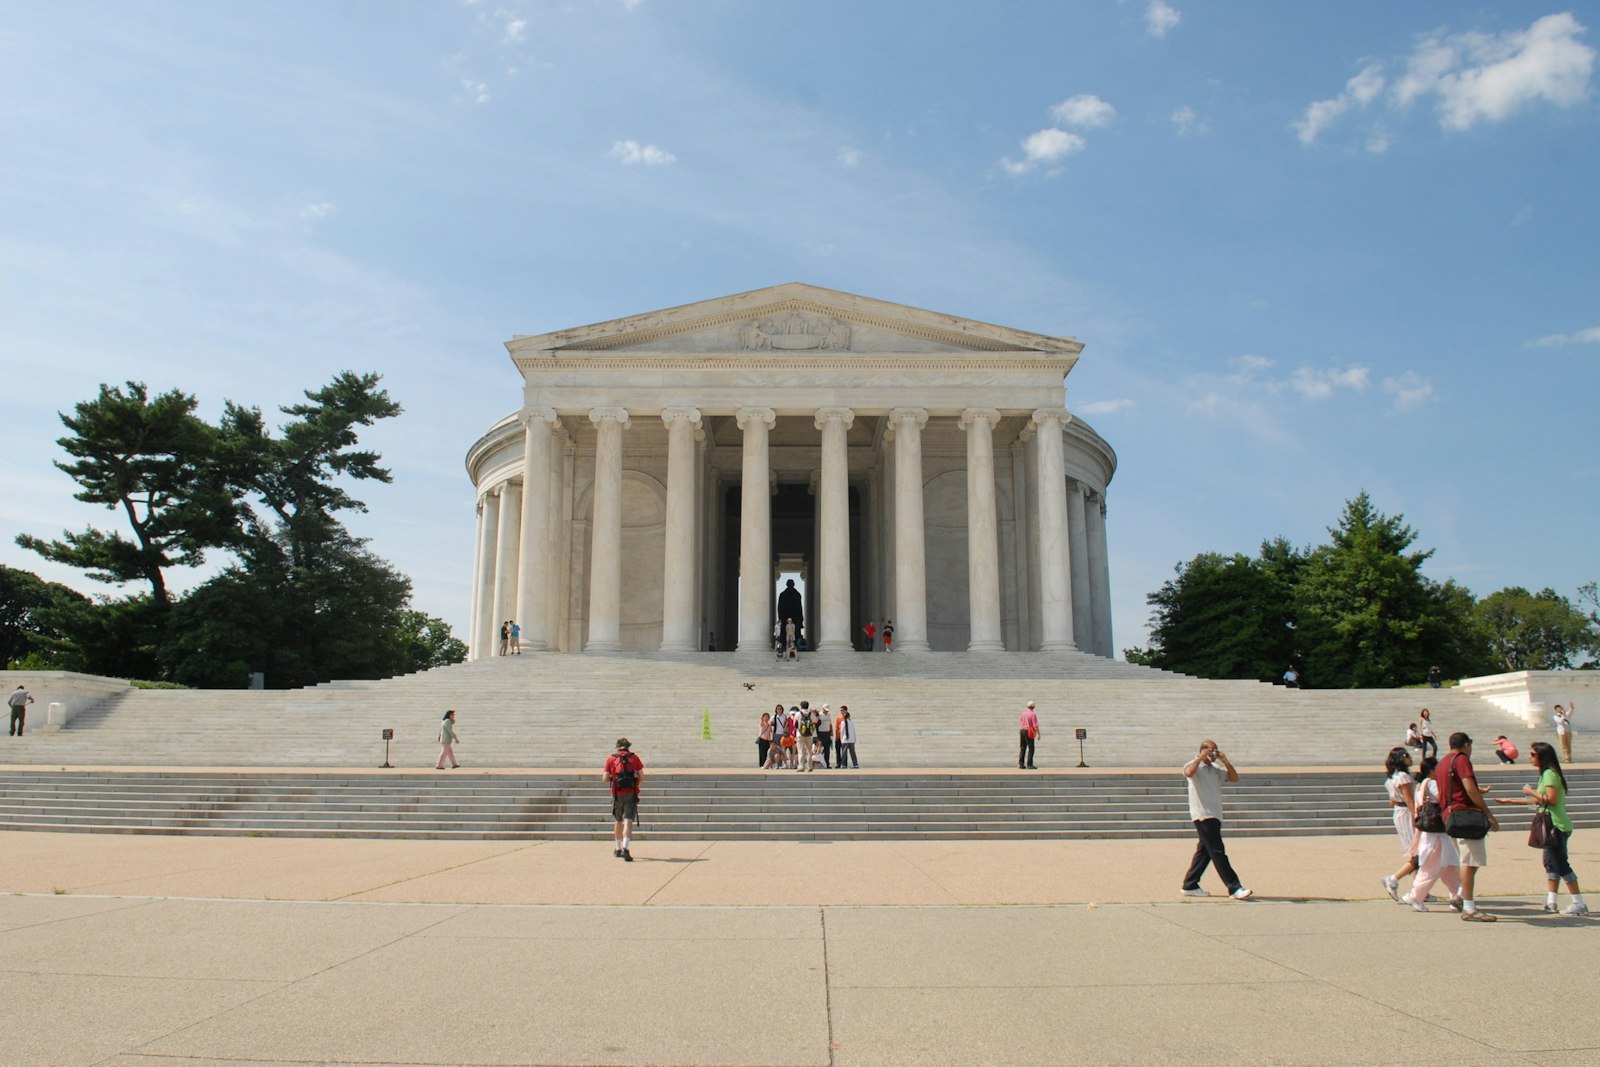 People walking up and down the steps of the Jefferson Memorial, a large domed stone structure